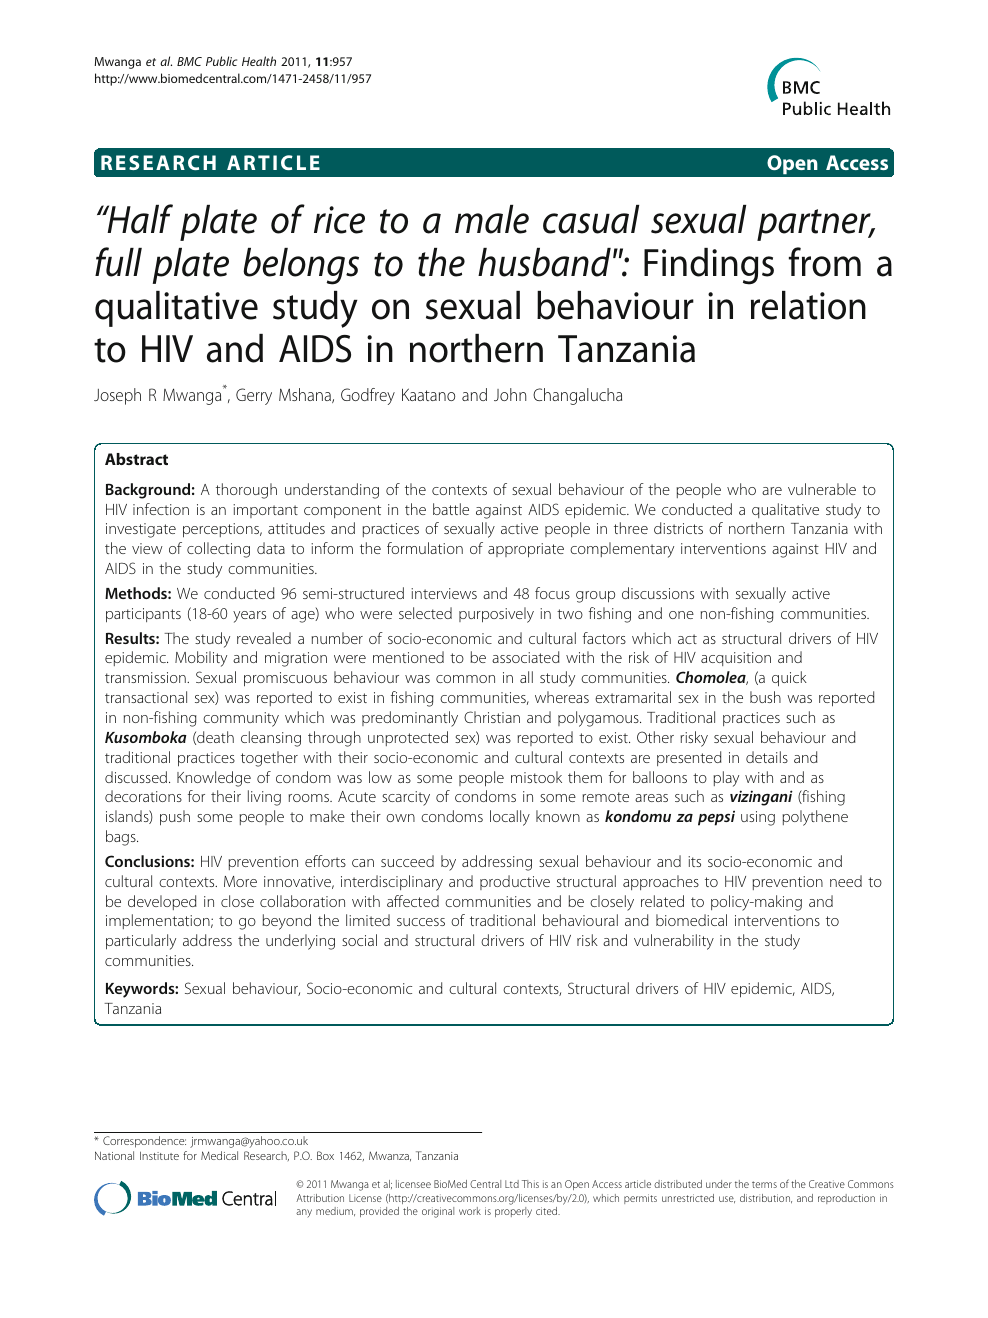 Half plate of rice to a male casual sexual partner, full plate belongs to the husband/